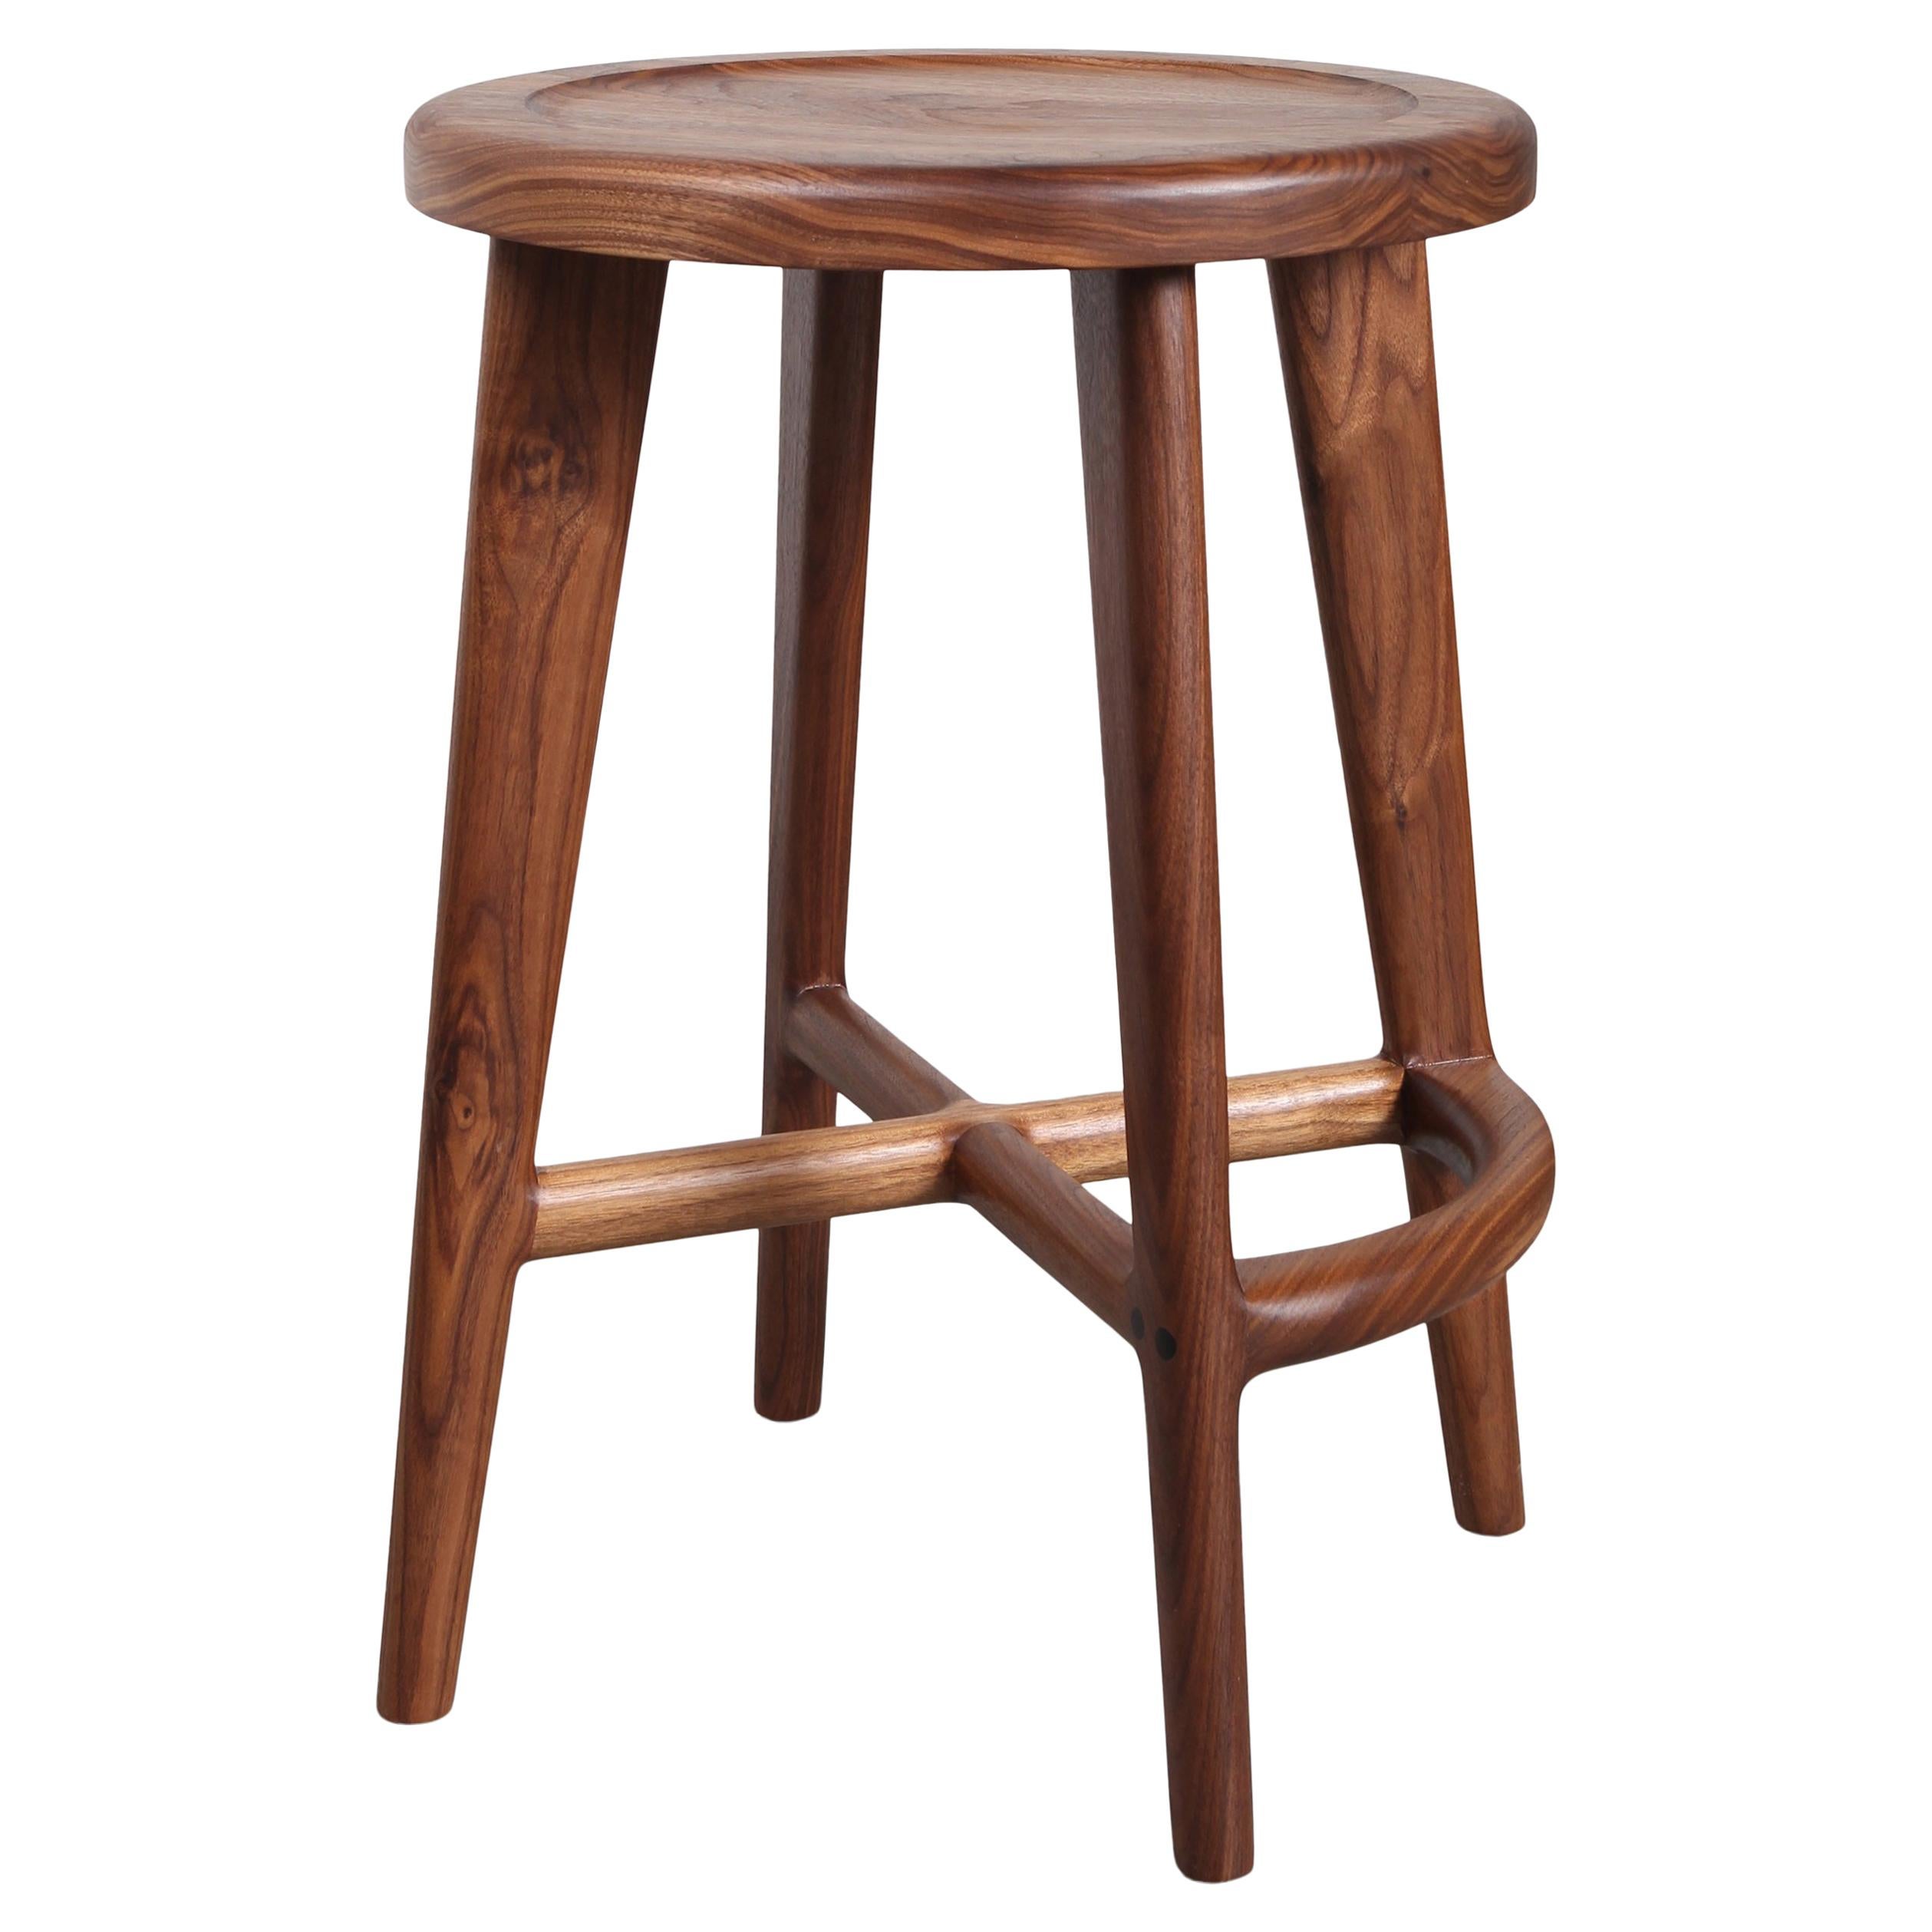 Handcrafted Solid Wood Bar or Counter Stool, Walnut Oak Ash